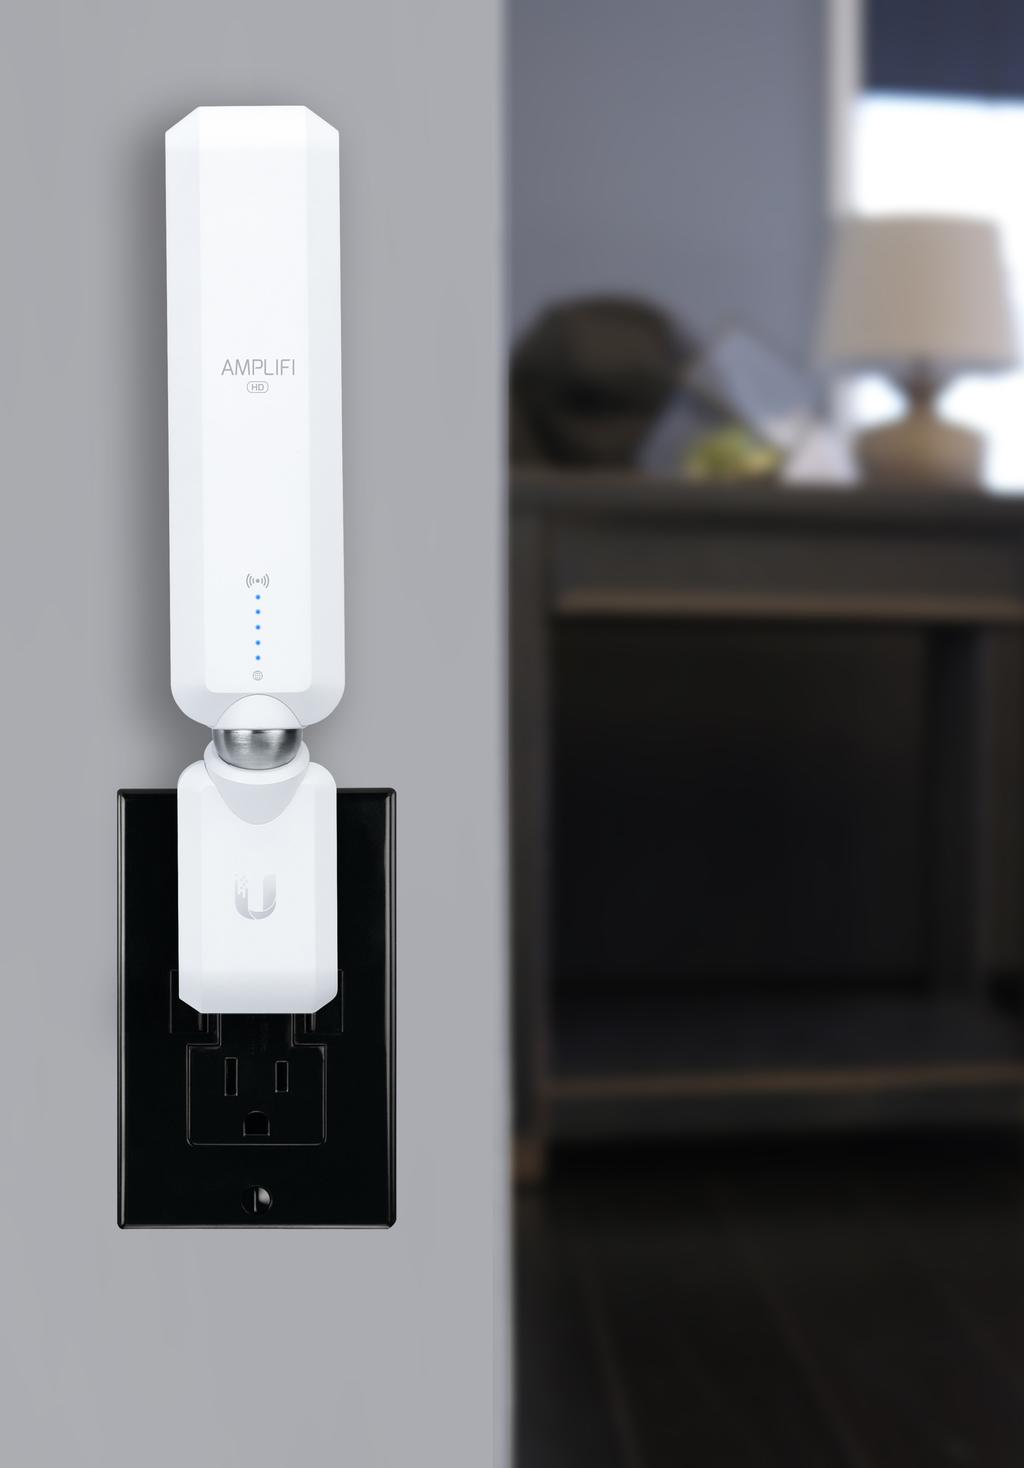 DATASHEET Wireless, Boosted The AmpliFi MeshPoint features an adjustable Super Antenna and fits discreetly in any household, wherever dead spots need coverage.